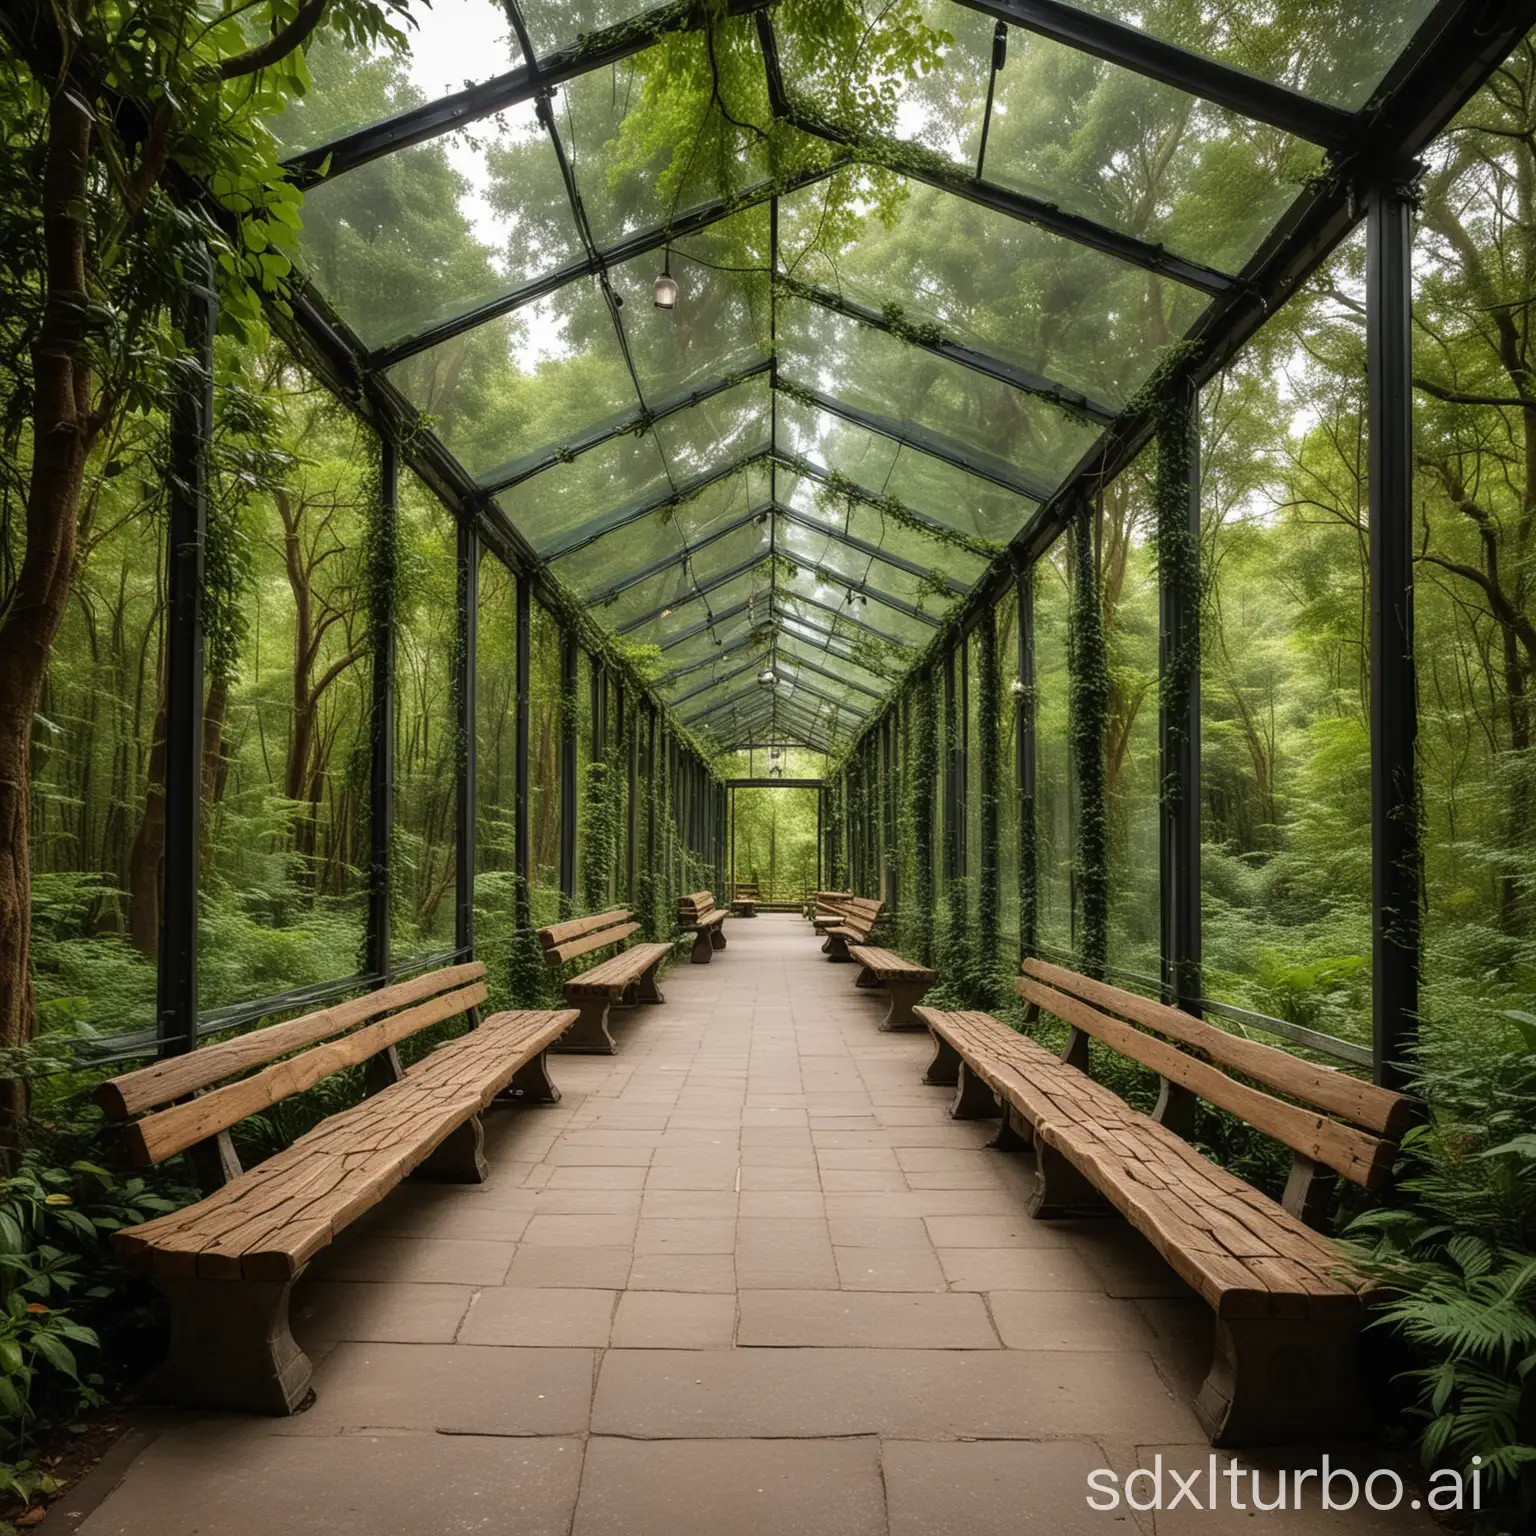 A straight promenade with a glass roof, leading through a densely overgrown rainforest, idyllic Romanesque lighting. On the sides, there are some benches for resting and decorative elements. Wide angle